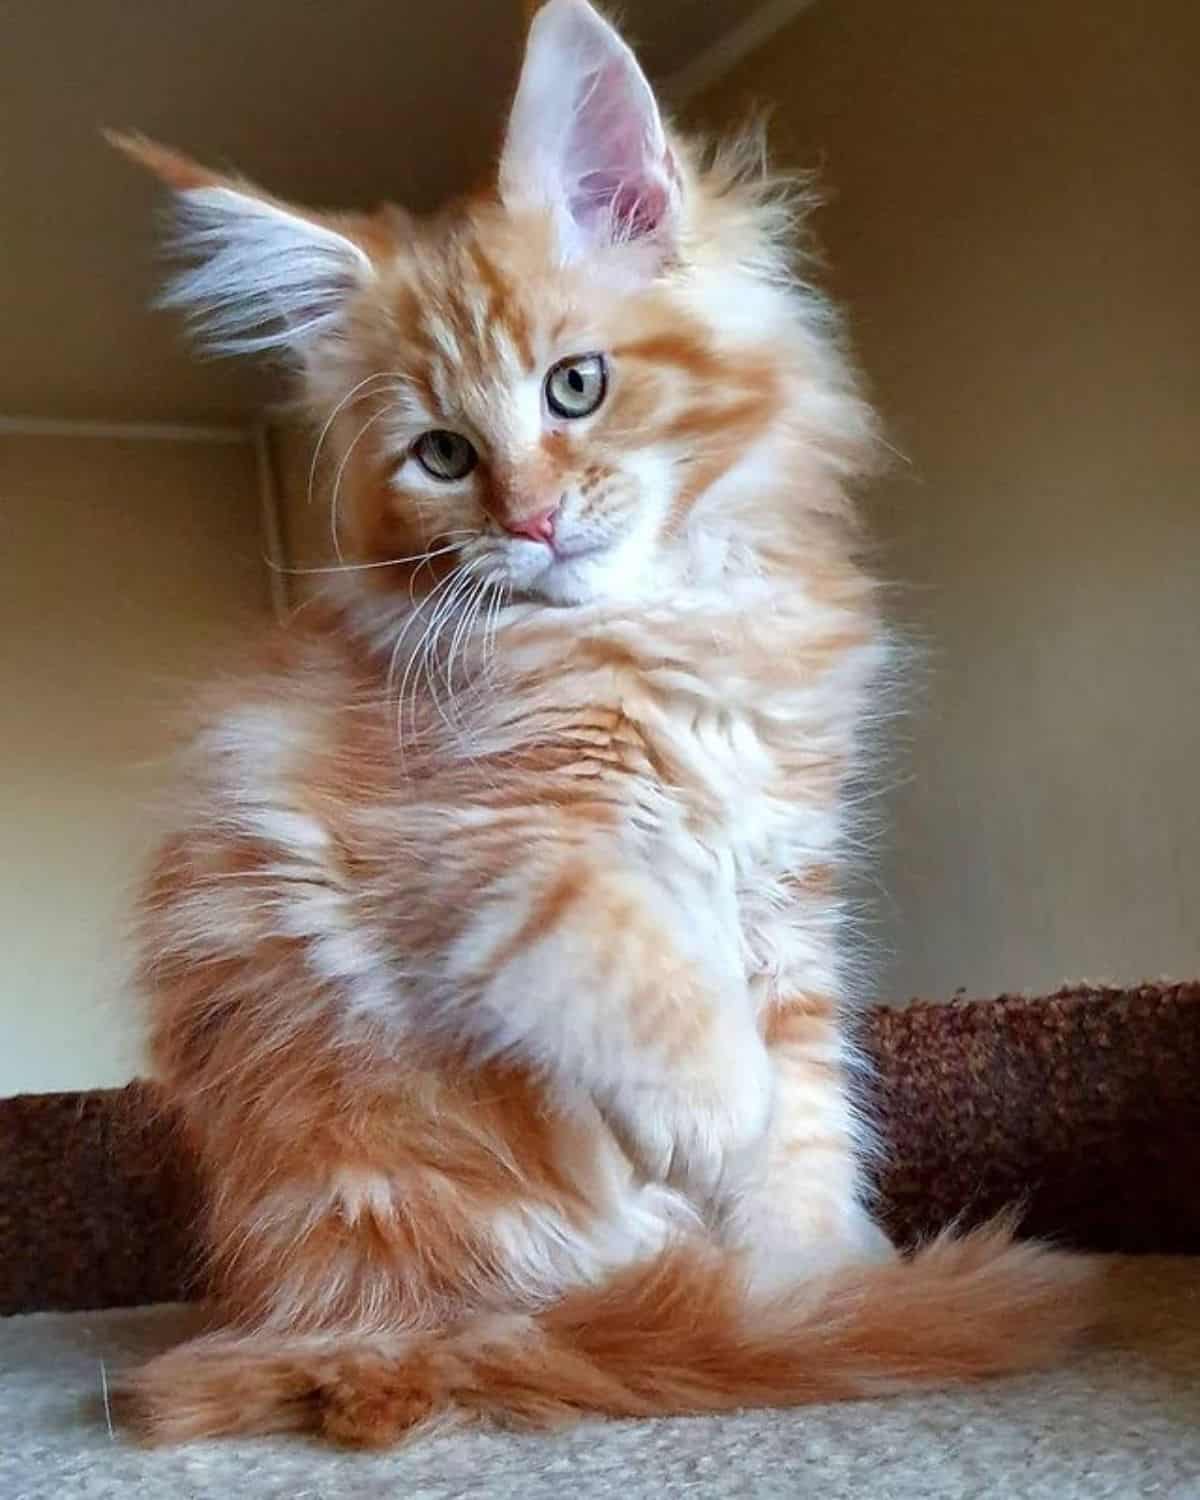 A fluffy ginger maine coon sitting on a cat bed.